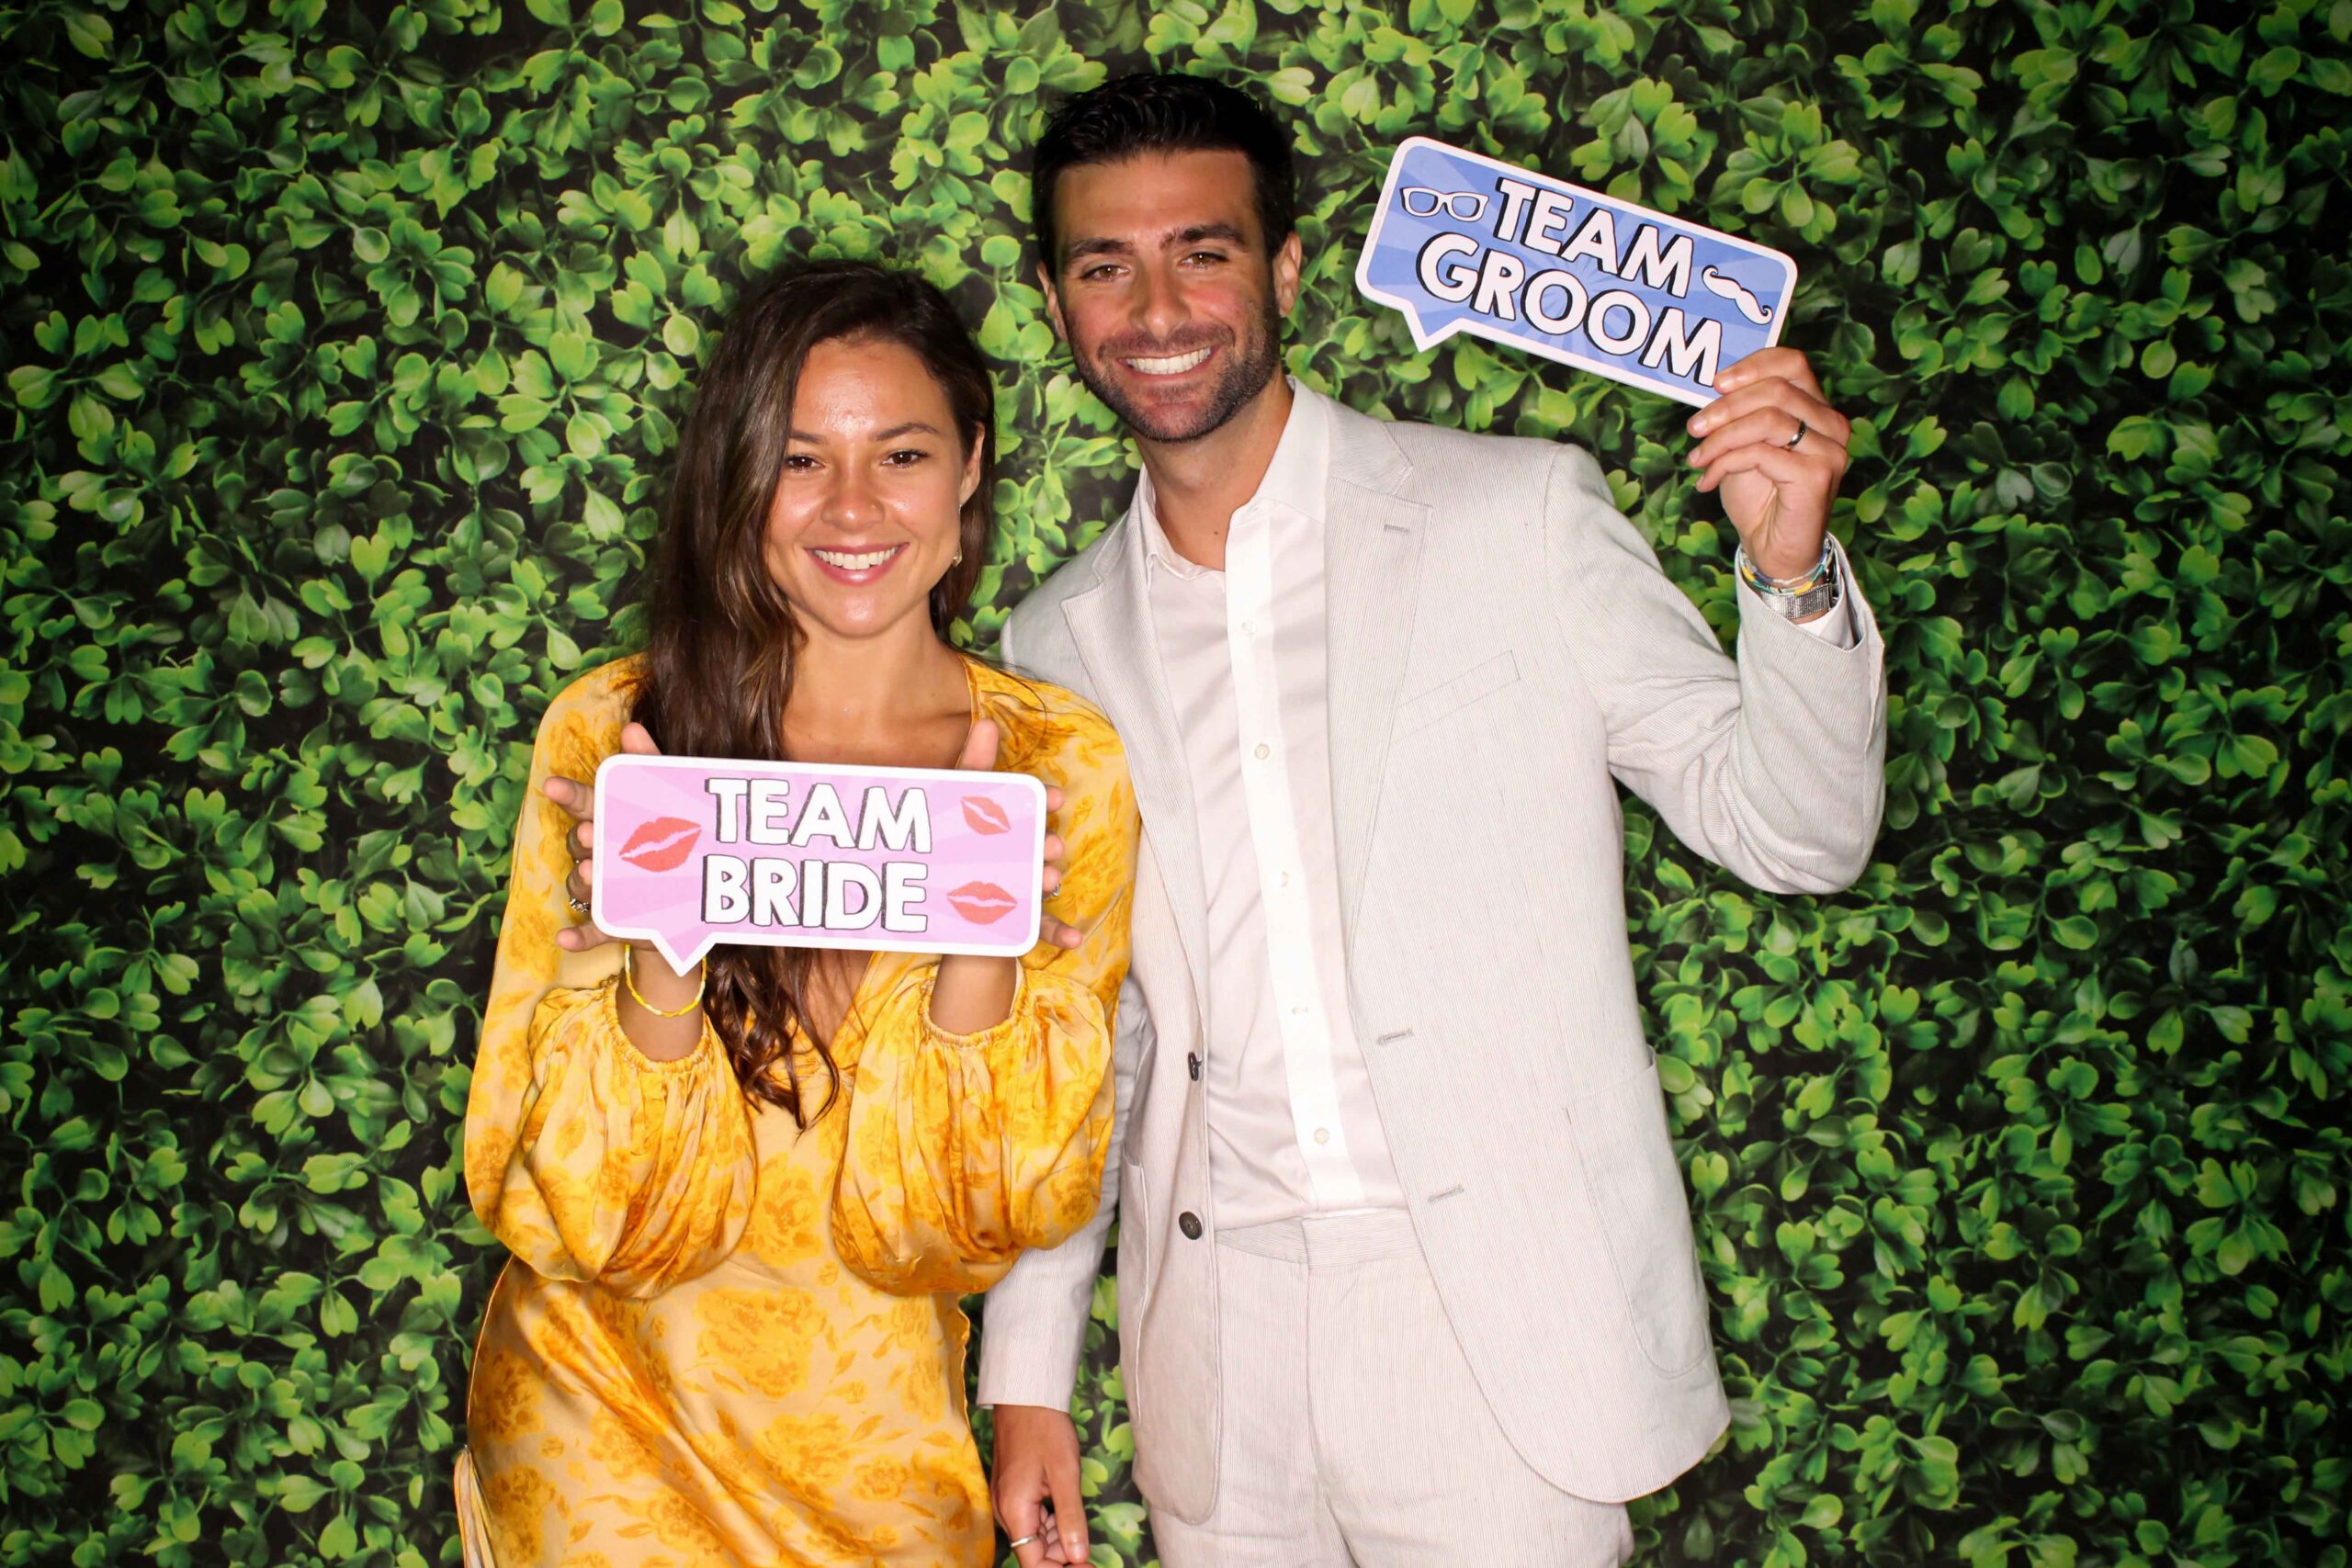 man holds a sign that says "team groom" and woman holds a sign that says "team bride" as they pose for a photo booth picture with a bright green hedge backdrop